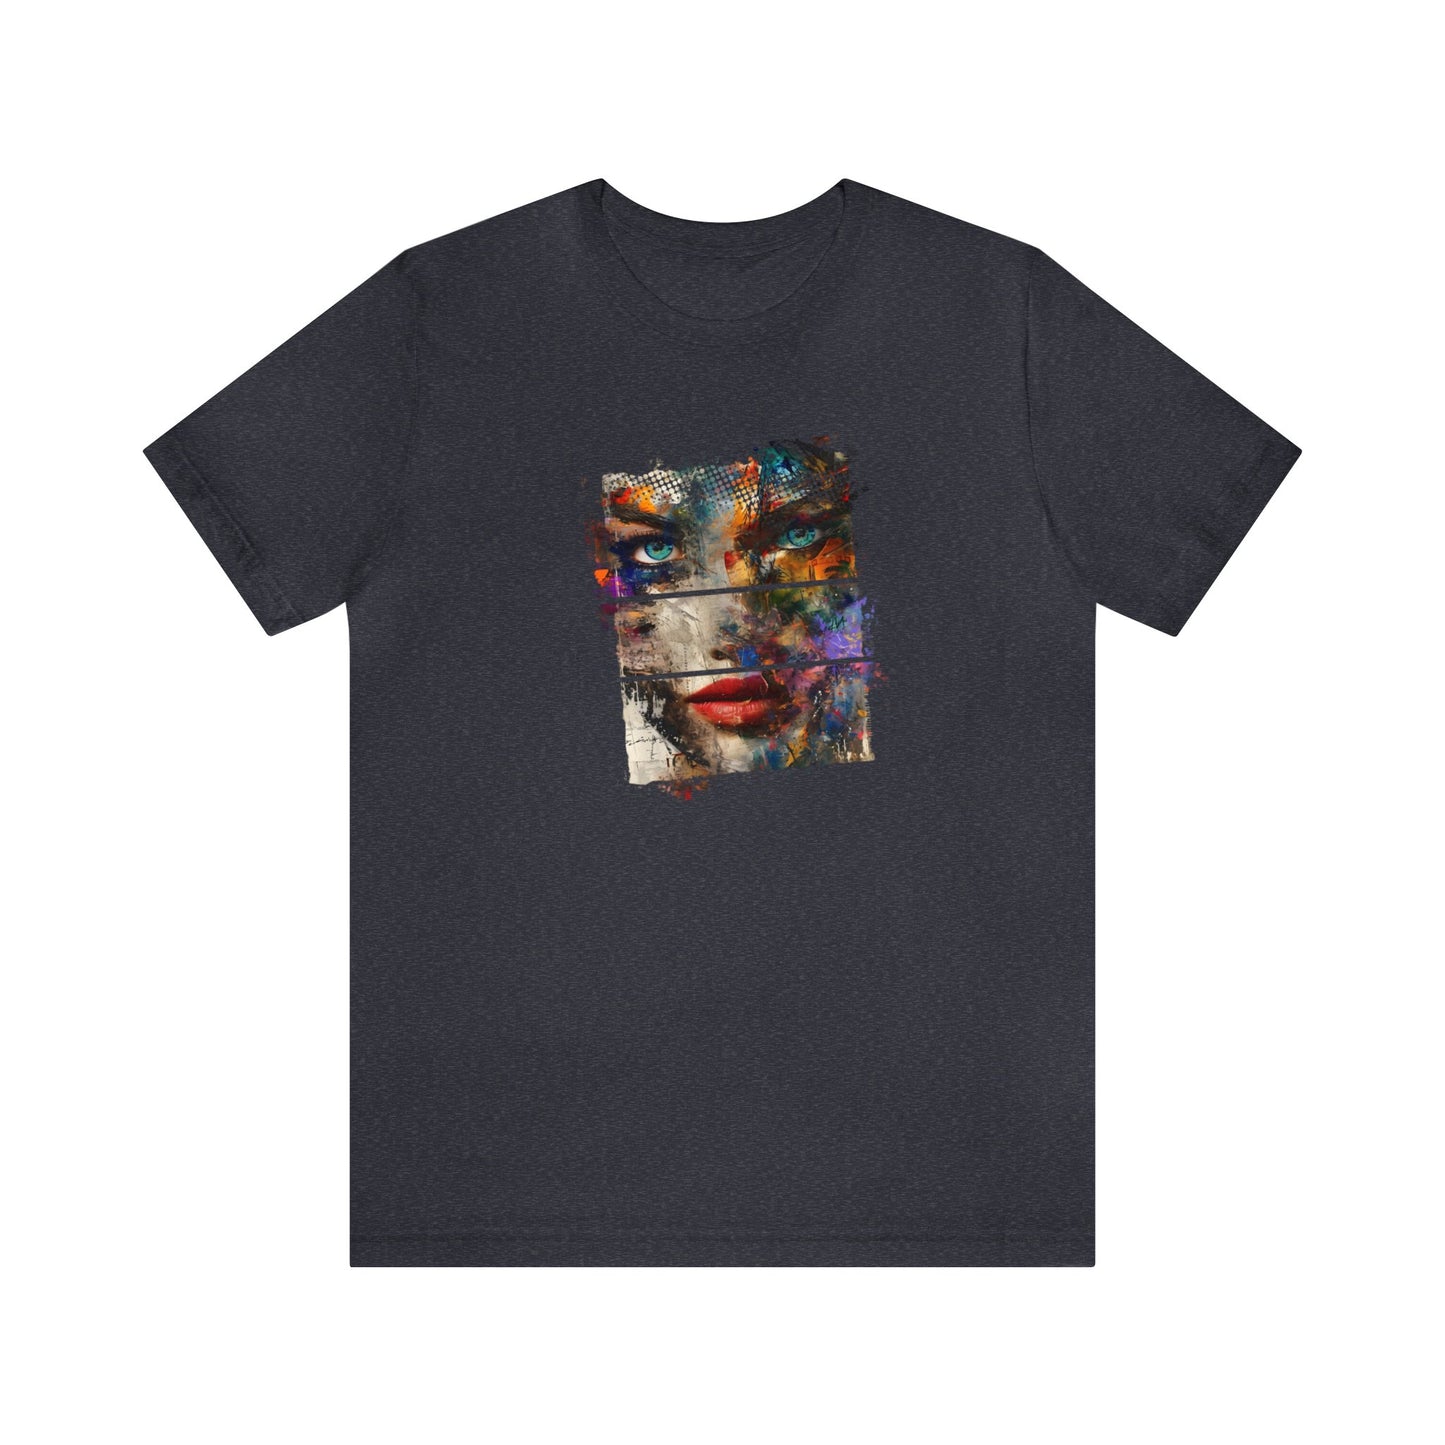 Modern Abstract Woman's Face Tee | Graffiti Style Colors | Unisex Jersey Shirt, Urban Style Colorful Shirt Top Graphic Tee Artsy Shirt